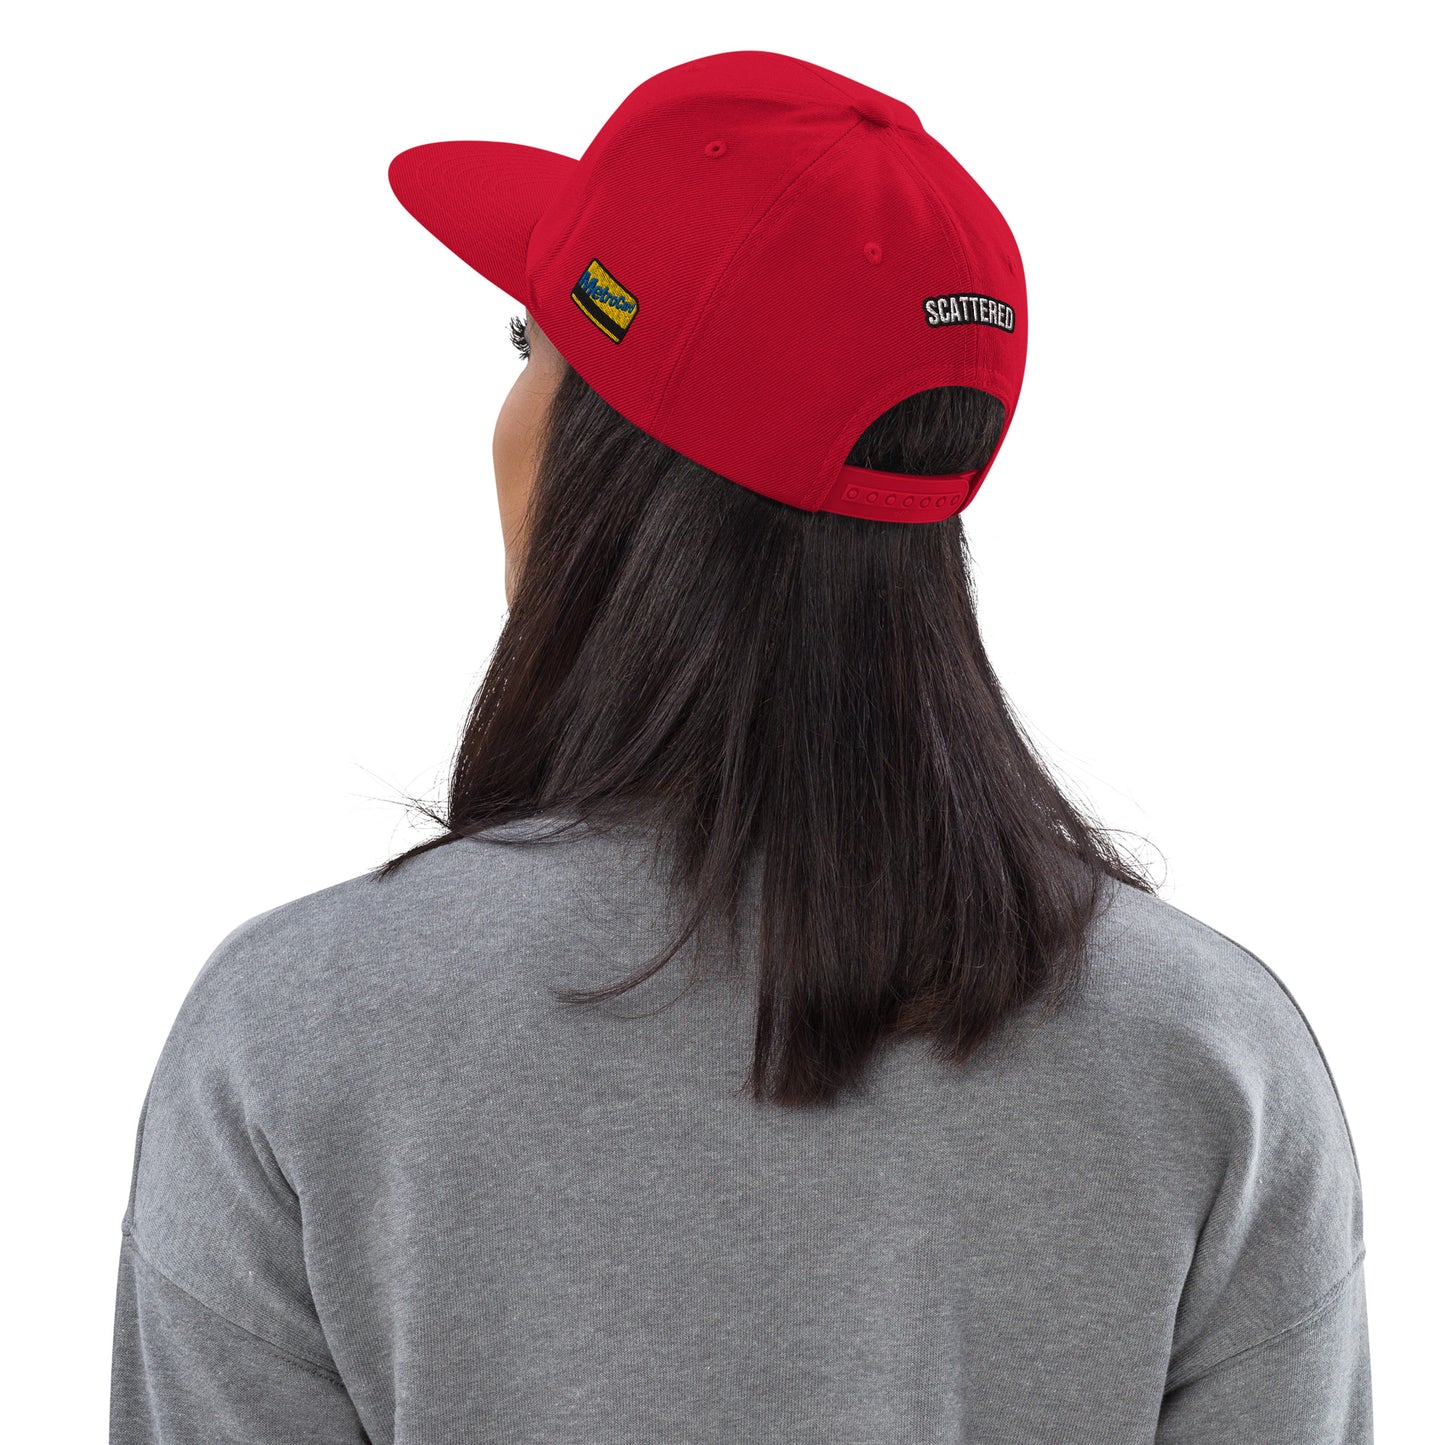 New York Apple Logo Embroidered Red Snapback Hat (Metro Card) Scattered Streetwear